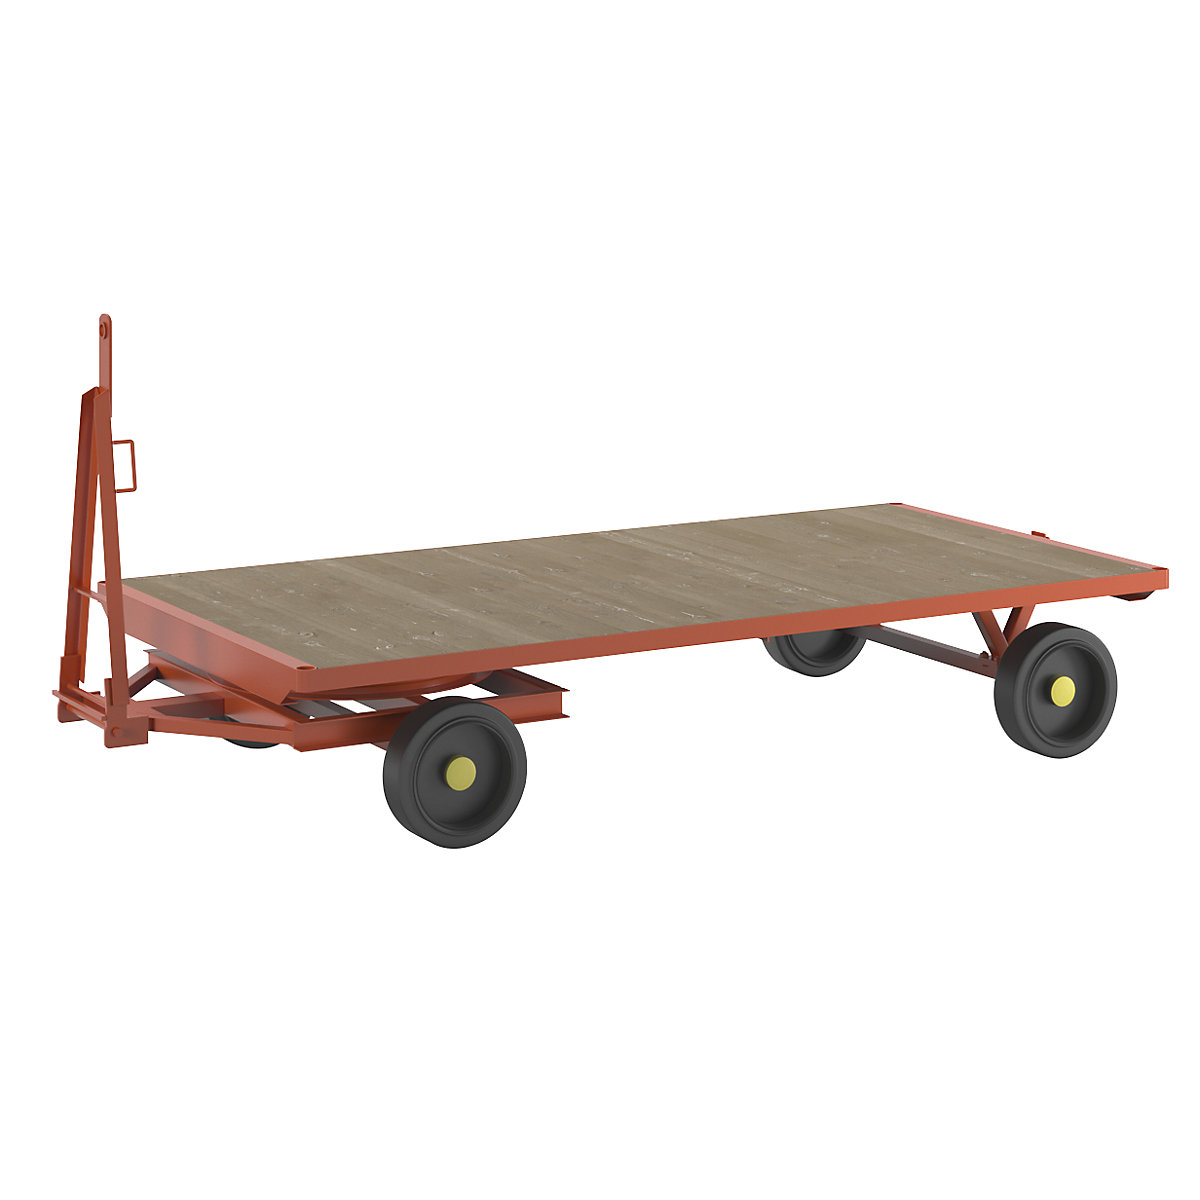 Trailer, 2-wheel turntable steering, max. load 5 t, platform 3.0 x 1.5 m, solid rubber tyres-1